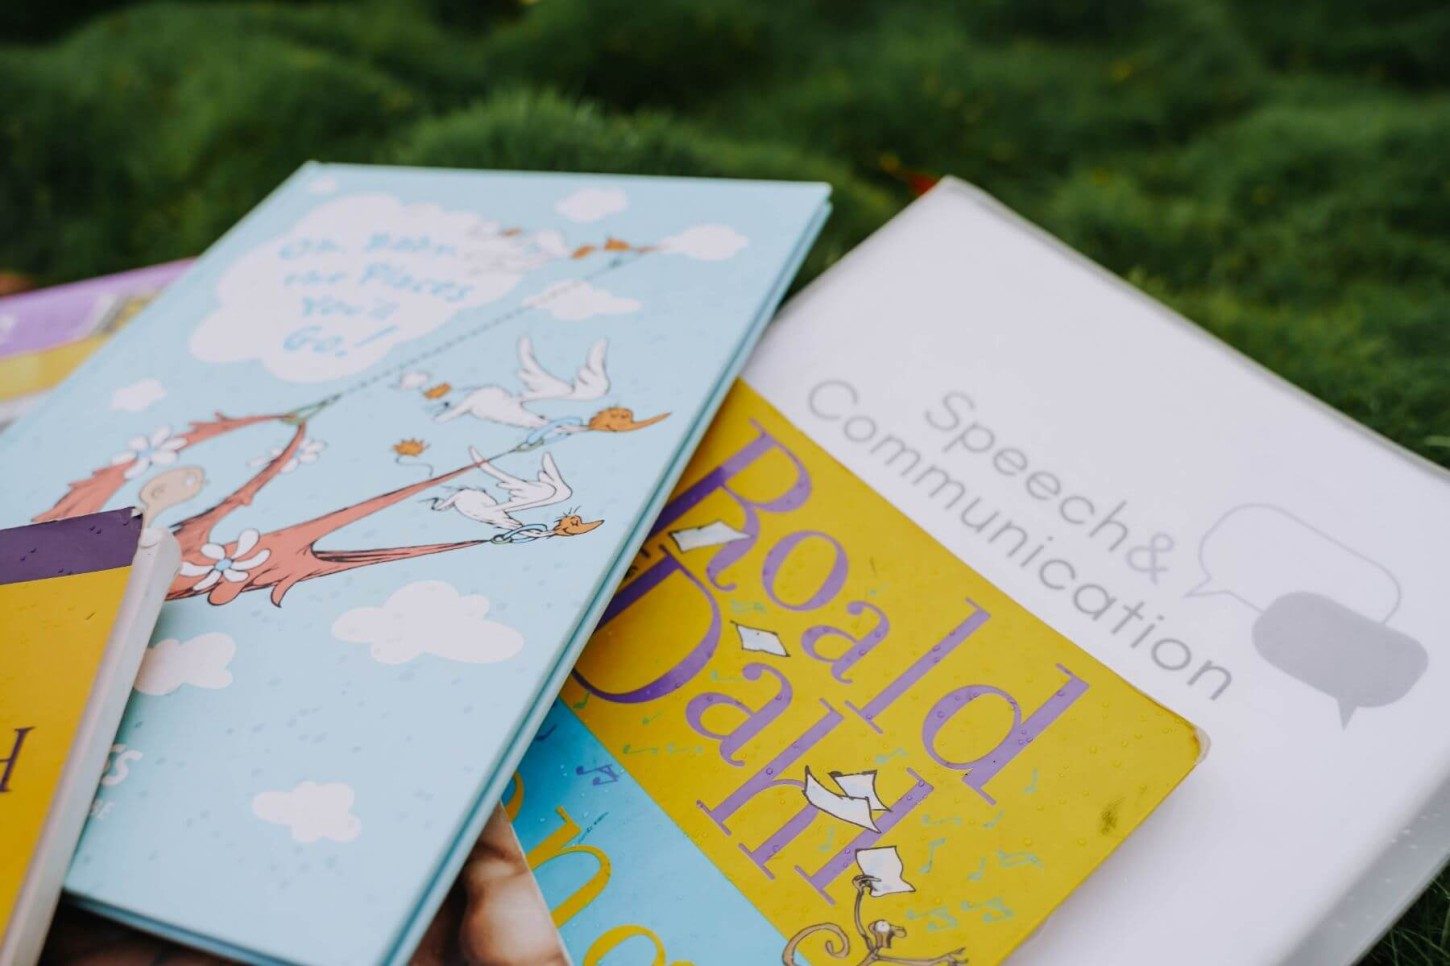 Roald Dahl and Dr Suess Books